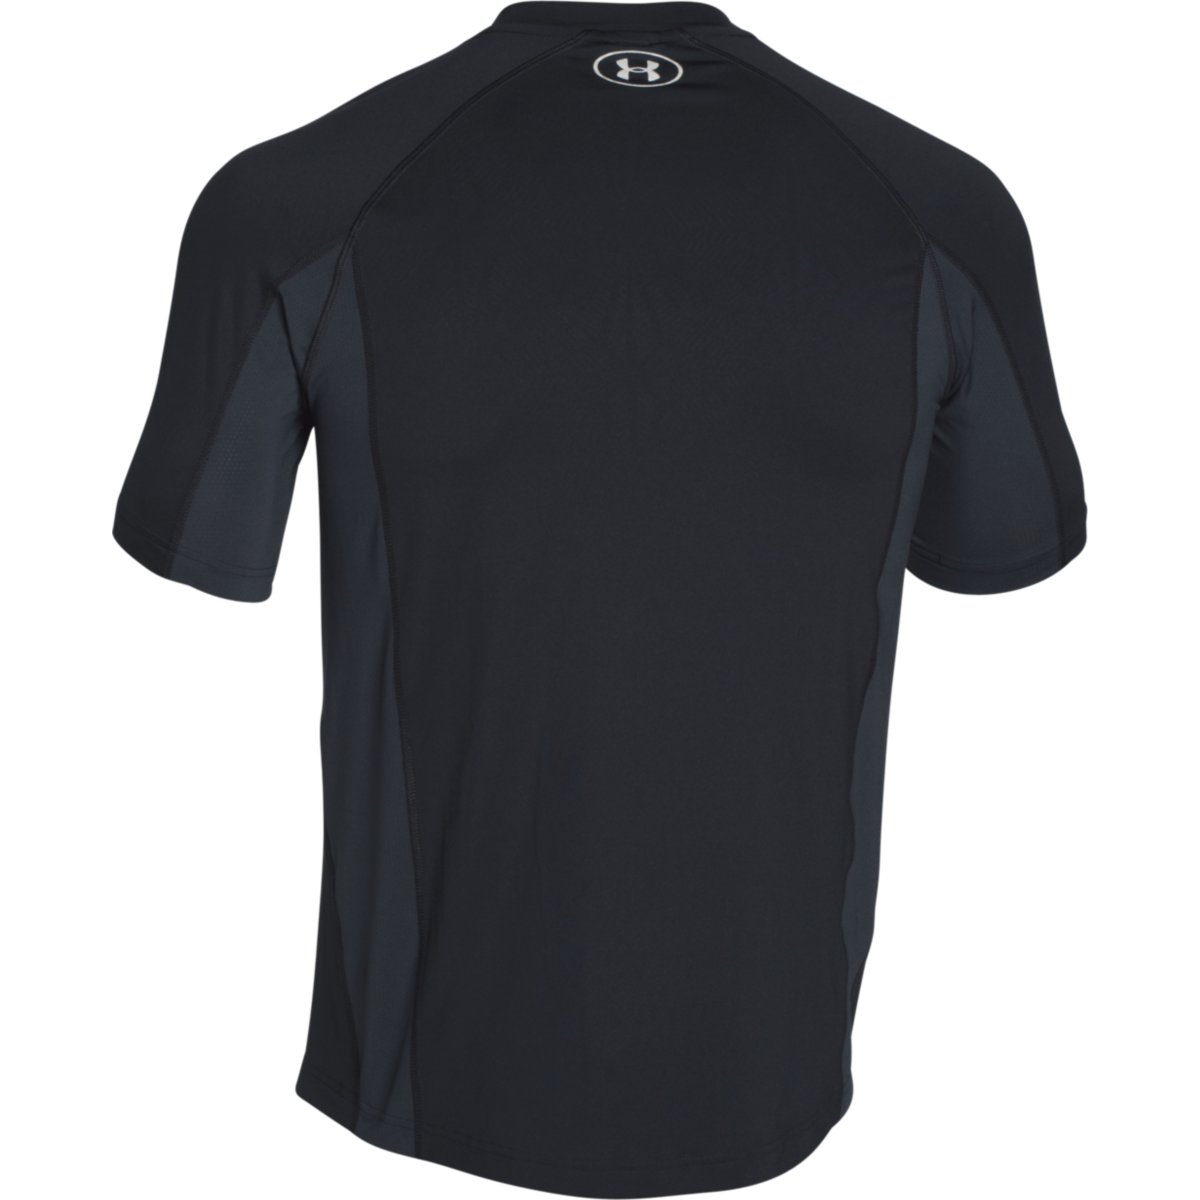 Under Armour Men's CoolSwitch Trail Short Sleeve T Shirt